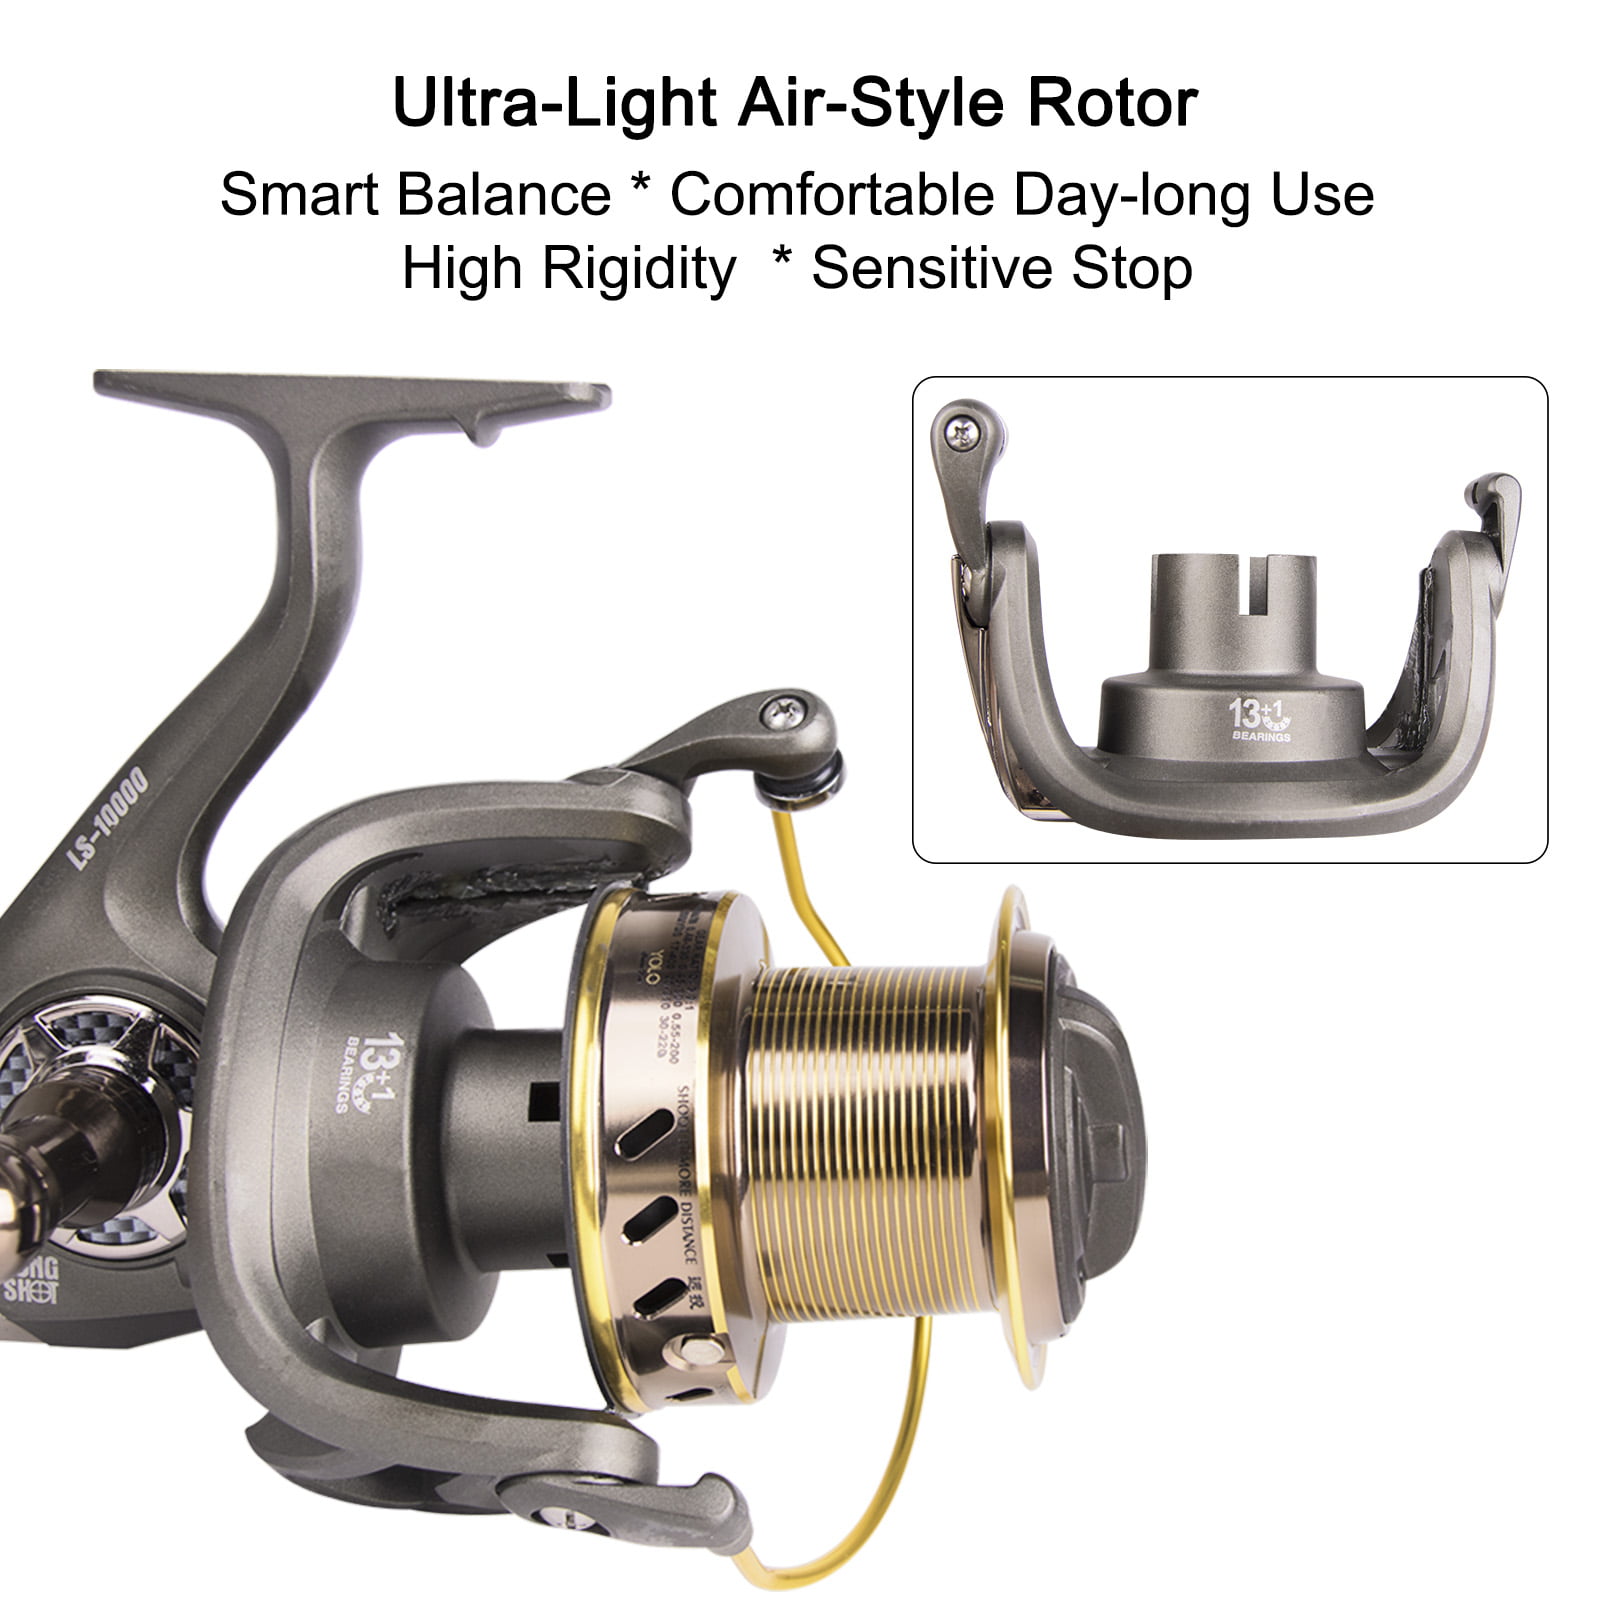 THKFISH Saltwater Spinning Reel 10000 Surf Fishing Reels Saltwater,13 +1  BB,45LB Max Drag,Ultra Smooth Heavy Duty Reel with CNC Aluminum Spool Reels